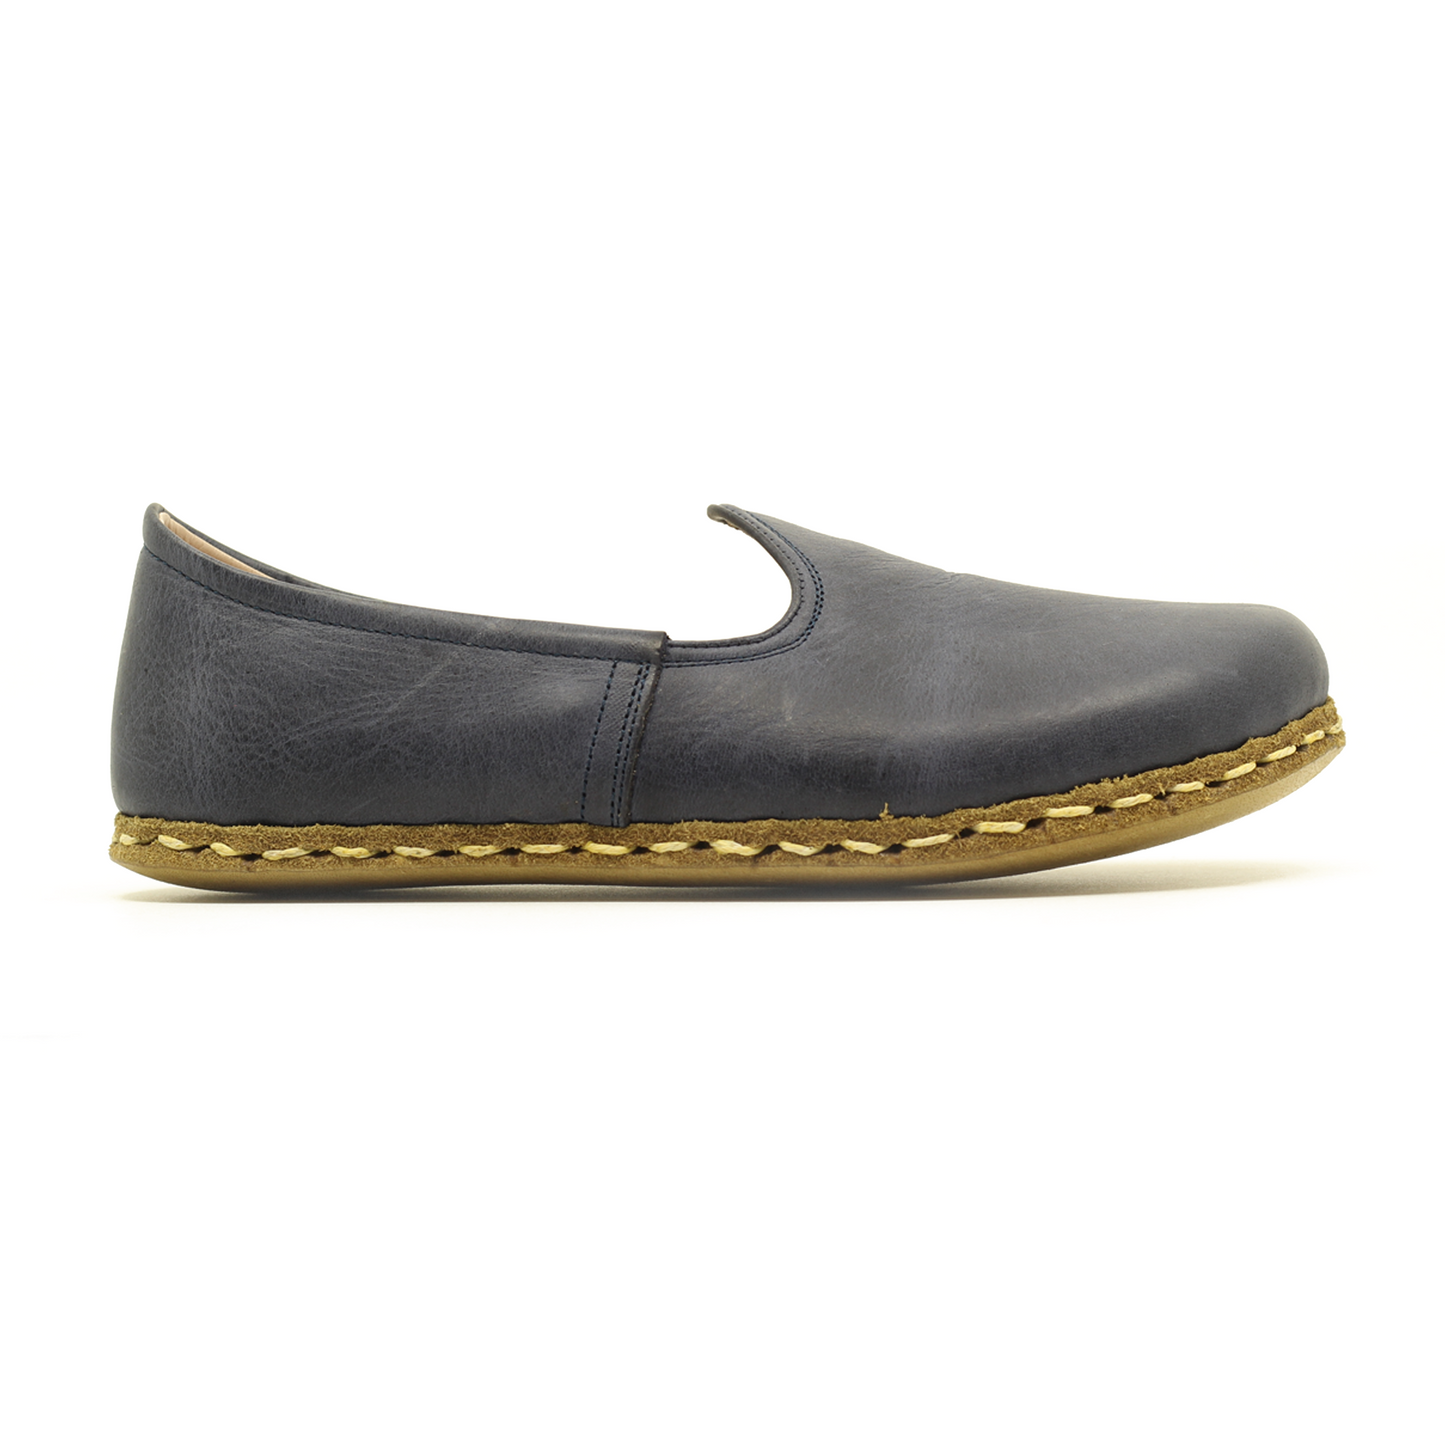 Navy Blue Barefoot Leather Shoes Flat for Women-Women Barefoot Shoes Classic-nefesshoes-3-Nefes Shoes